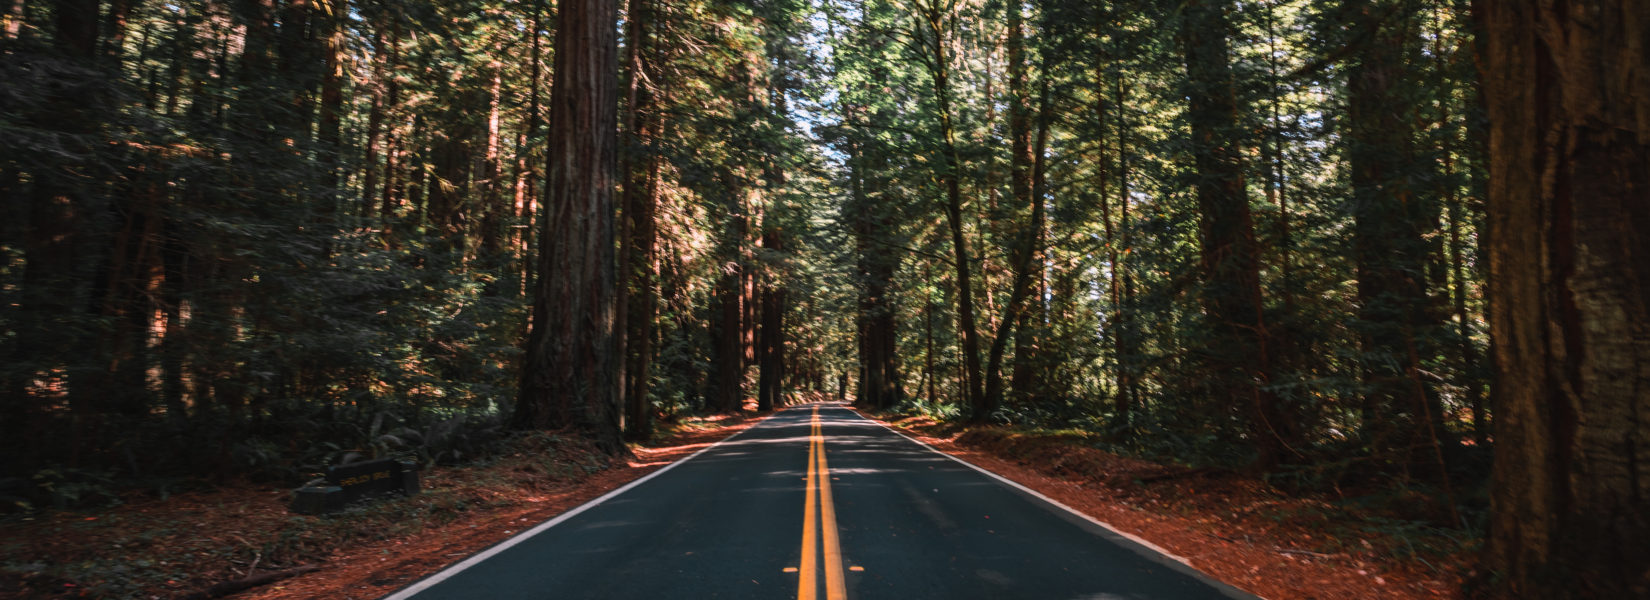 California Redwoods Road Trip Itinerary: Where to Find the Trees